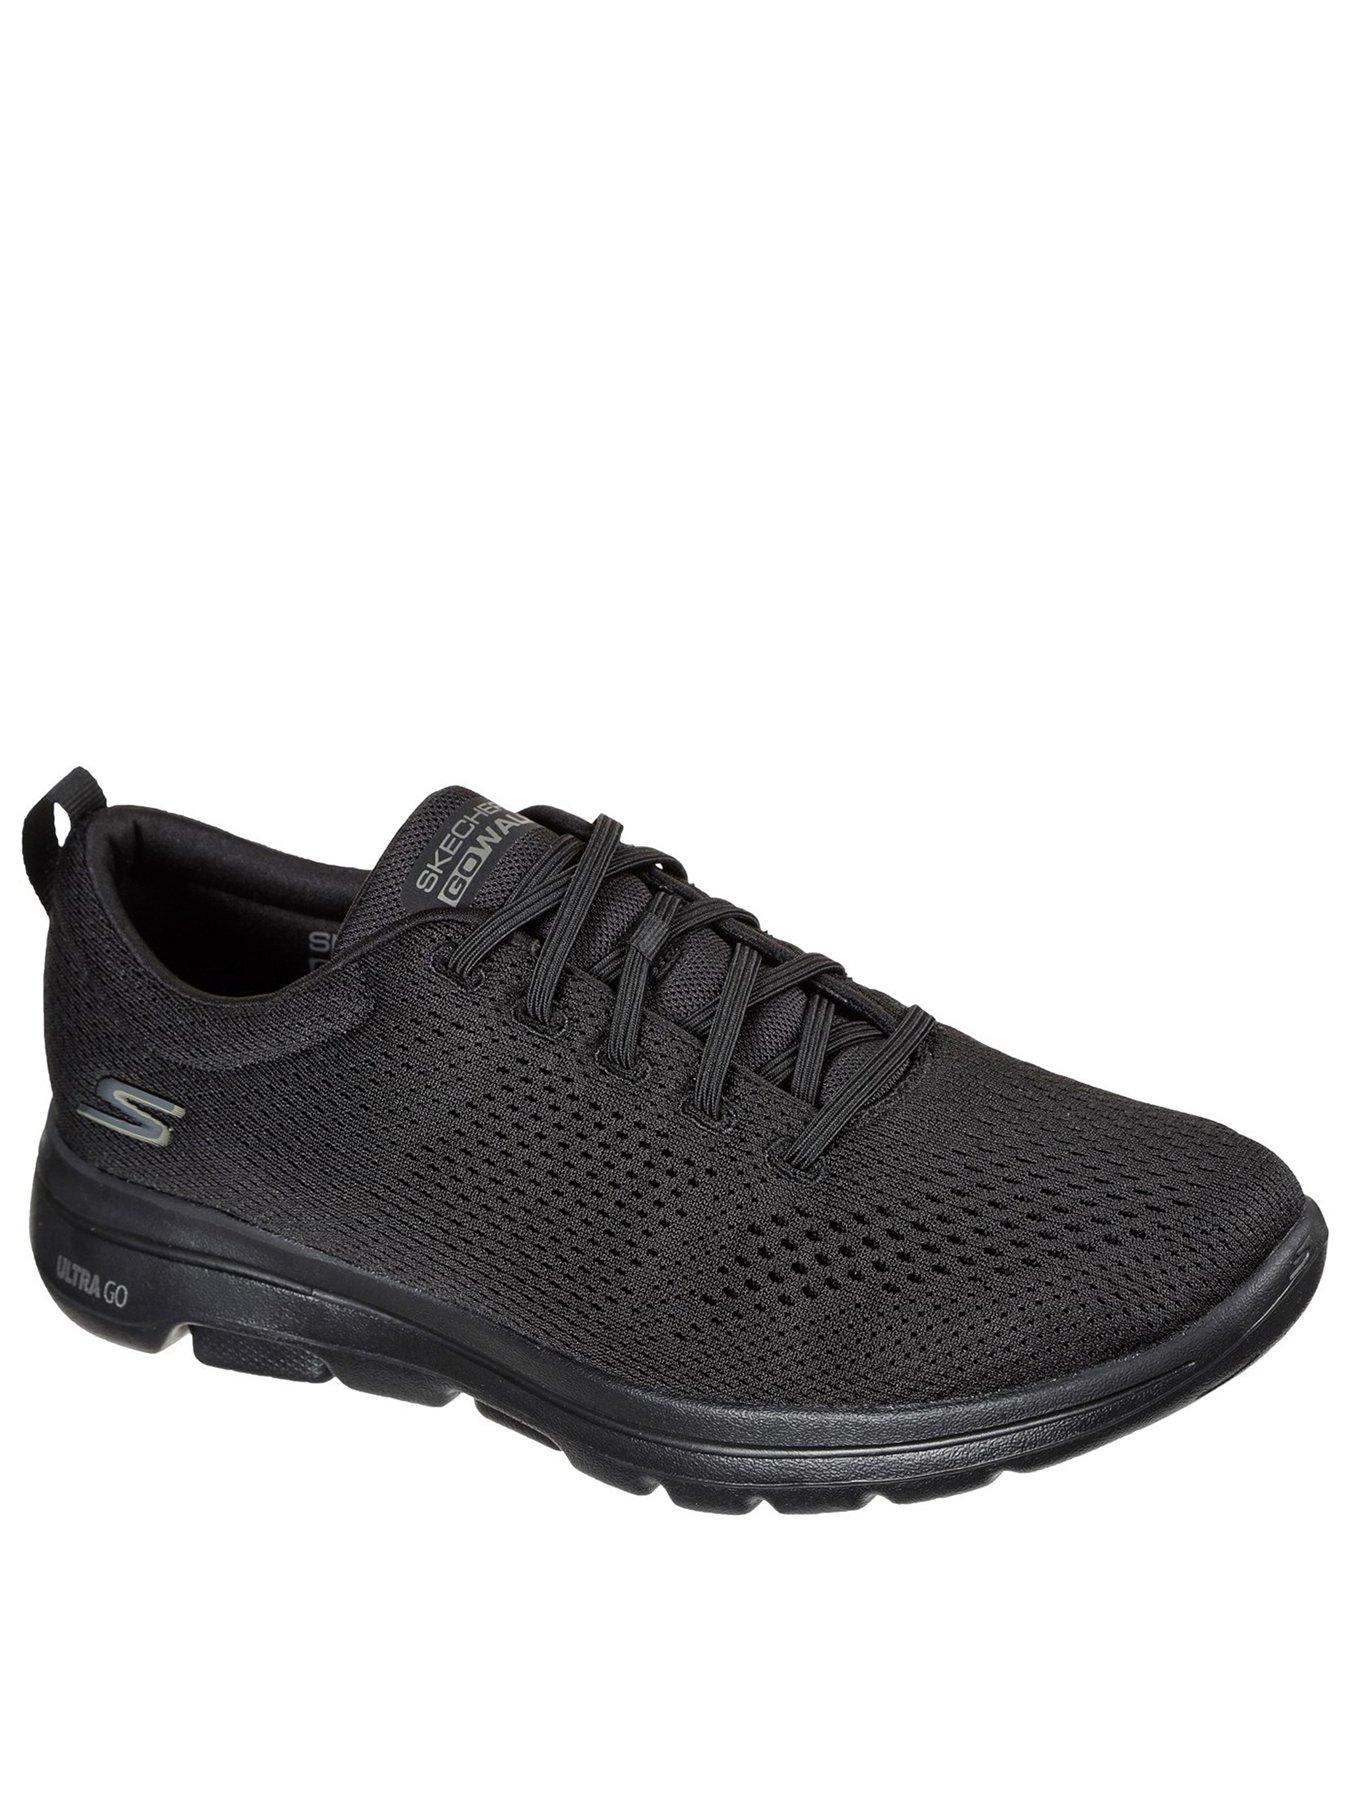 New Casual Boots Era Sneakers Shoes Details about   Certified London Men's Designer Trainers